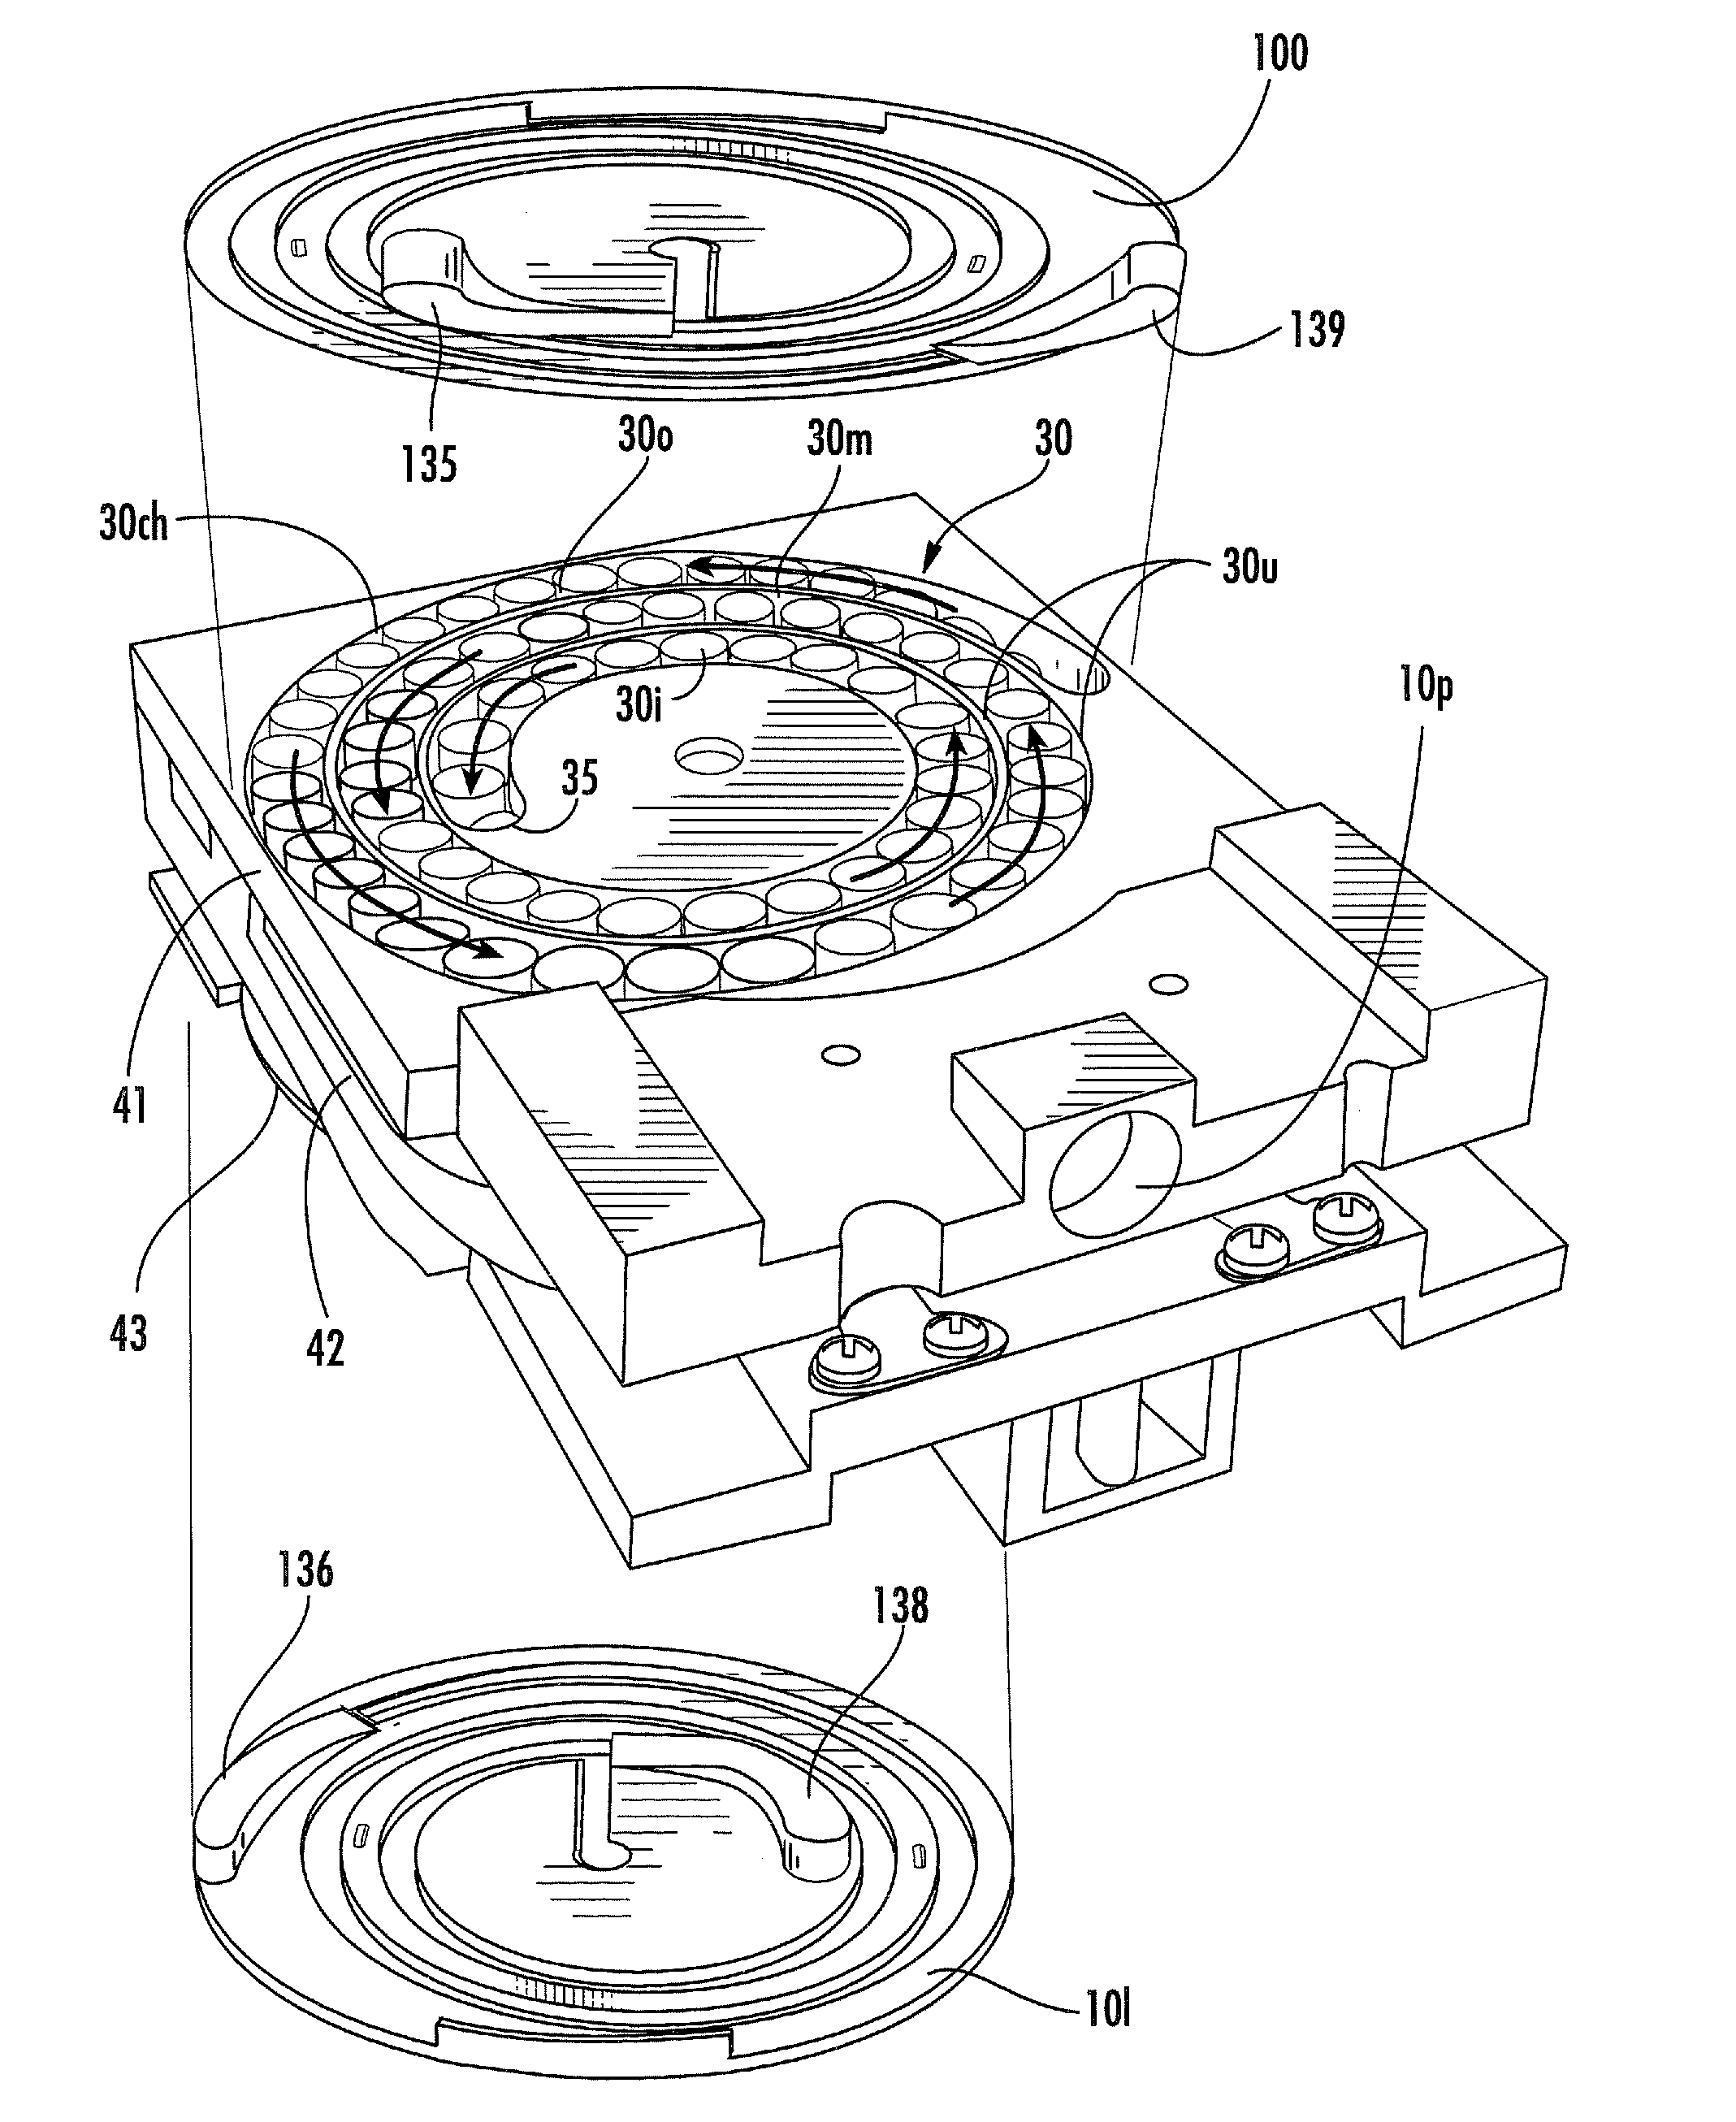 Dry powder inhalers having spiral travel paths, unit dose microcartridges with dry powder, related devices and methods